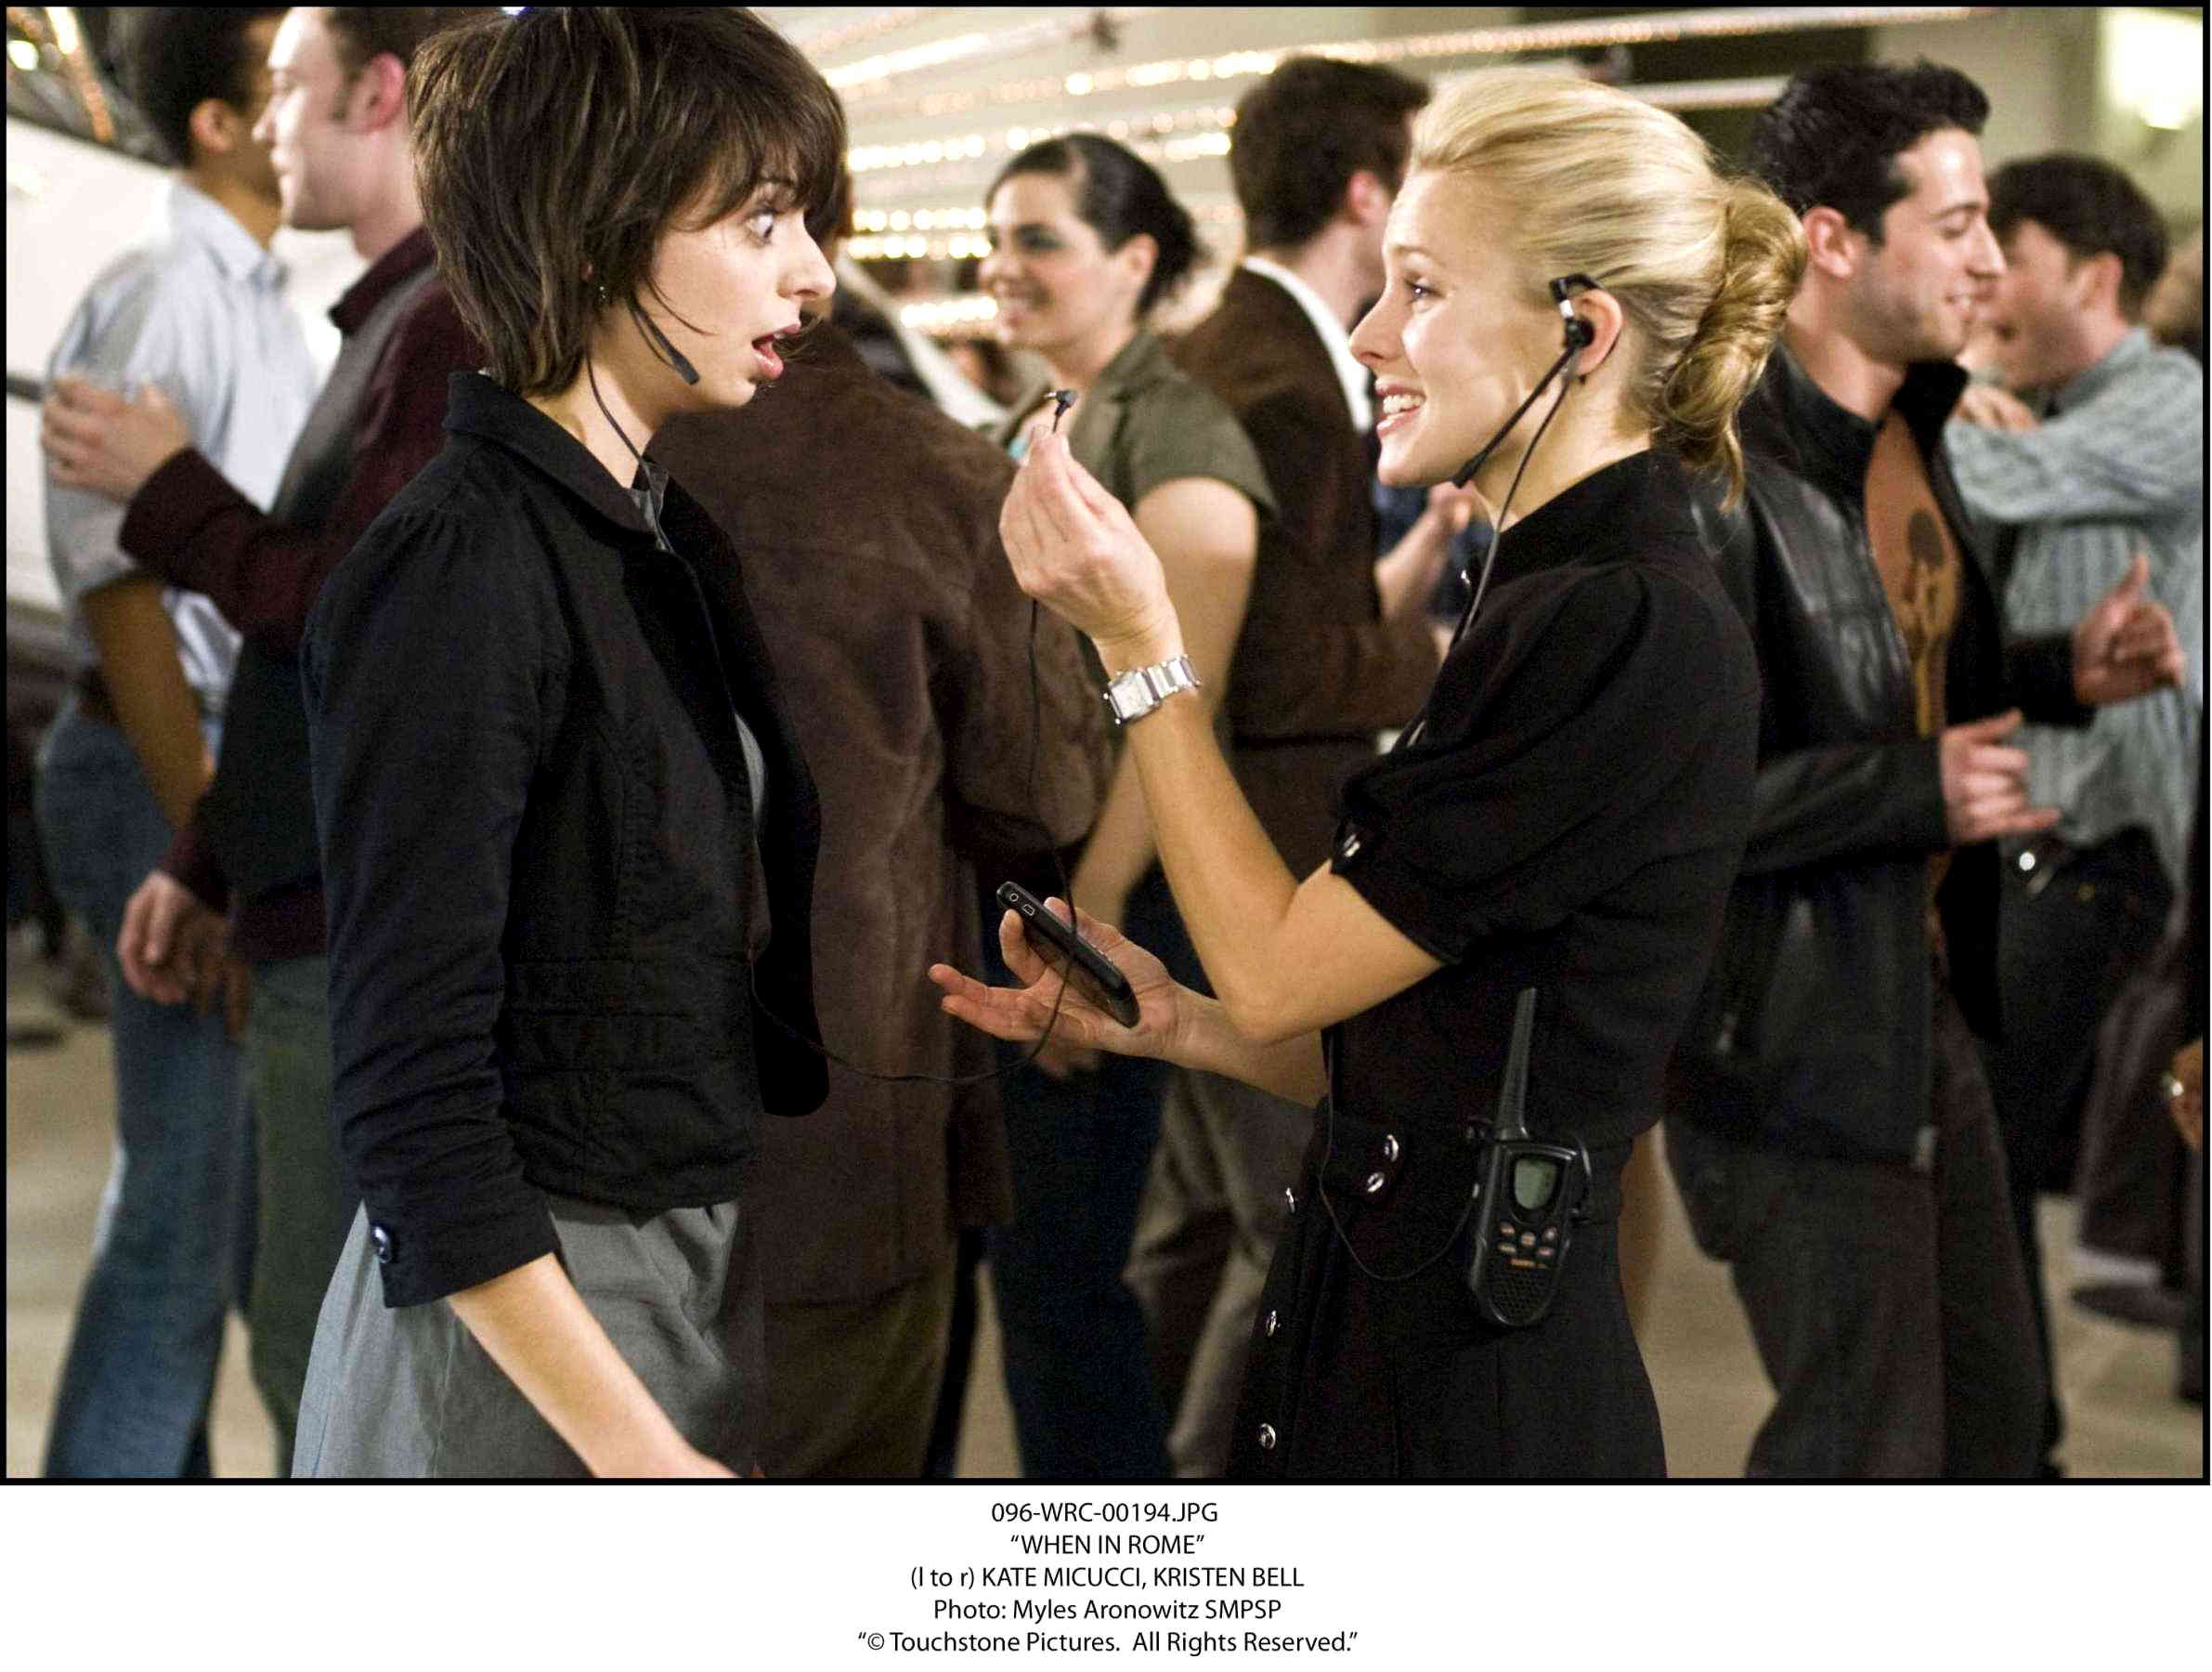 Kate Micucci stars as Stacy and Kristen Bell stars as Beth Harper in Walt Disney Pictures' When in Rome (2010). Photo credit by Myles Aronowitz.